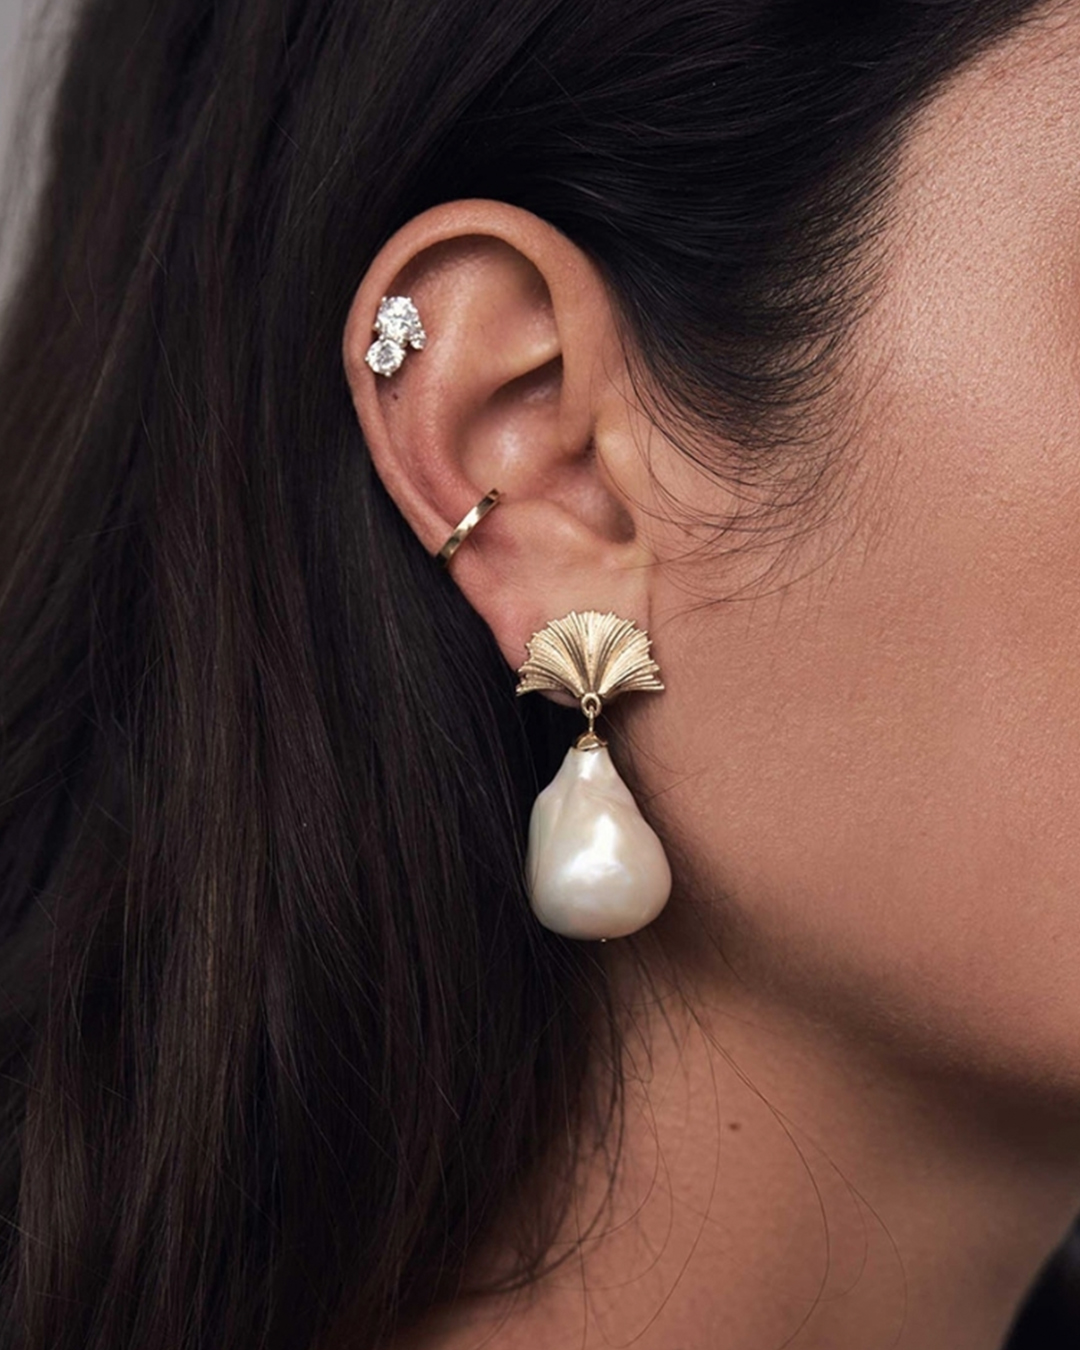 Someone wears a pearl and stud earrings from Meadowlark.